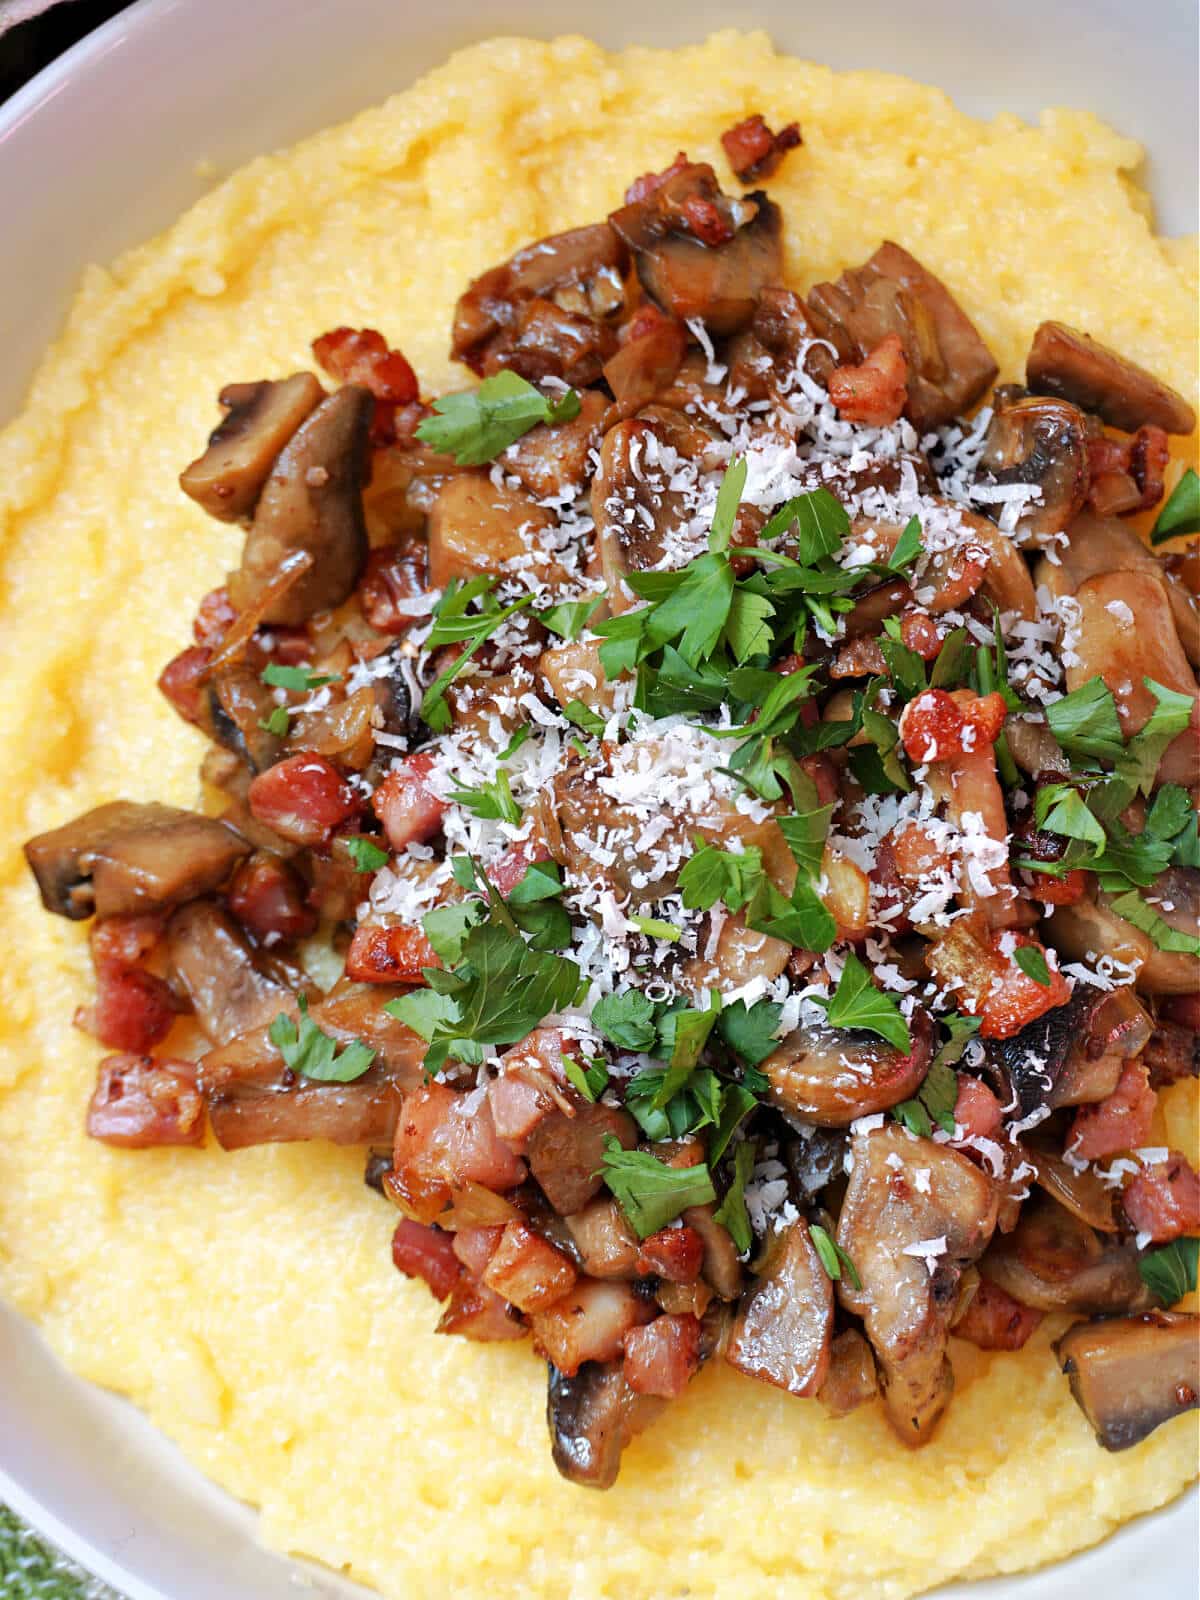 Mushrooms and bacon on a bed of polenta.